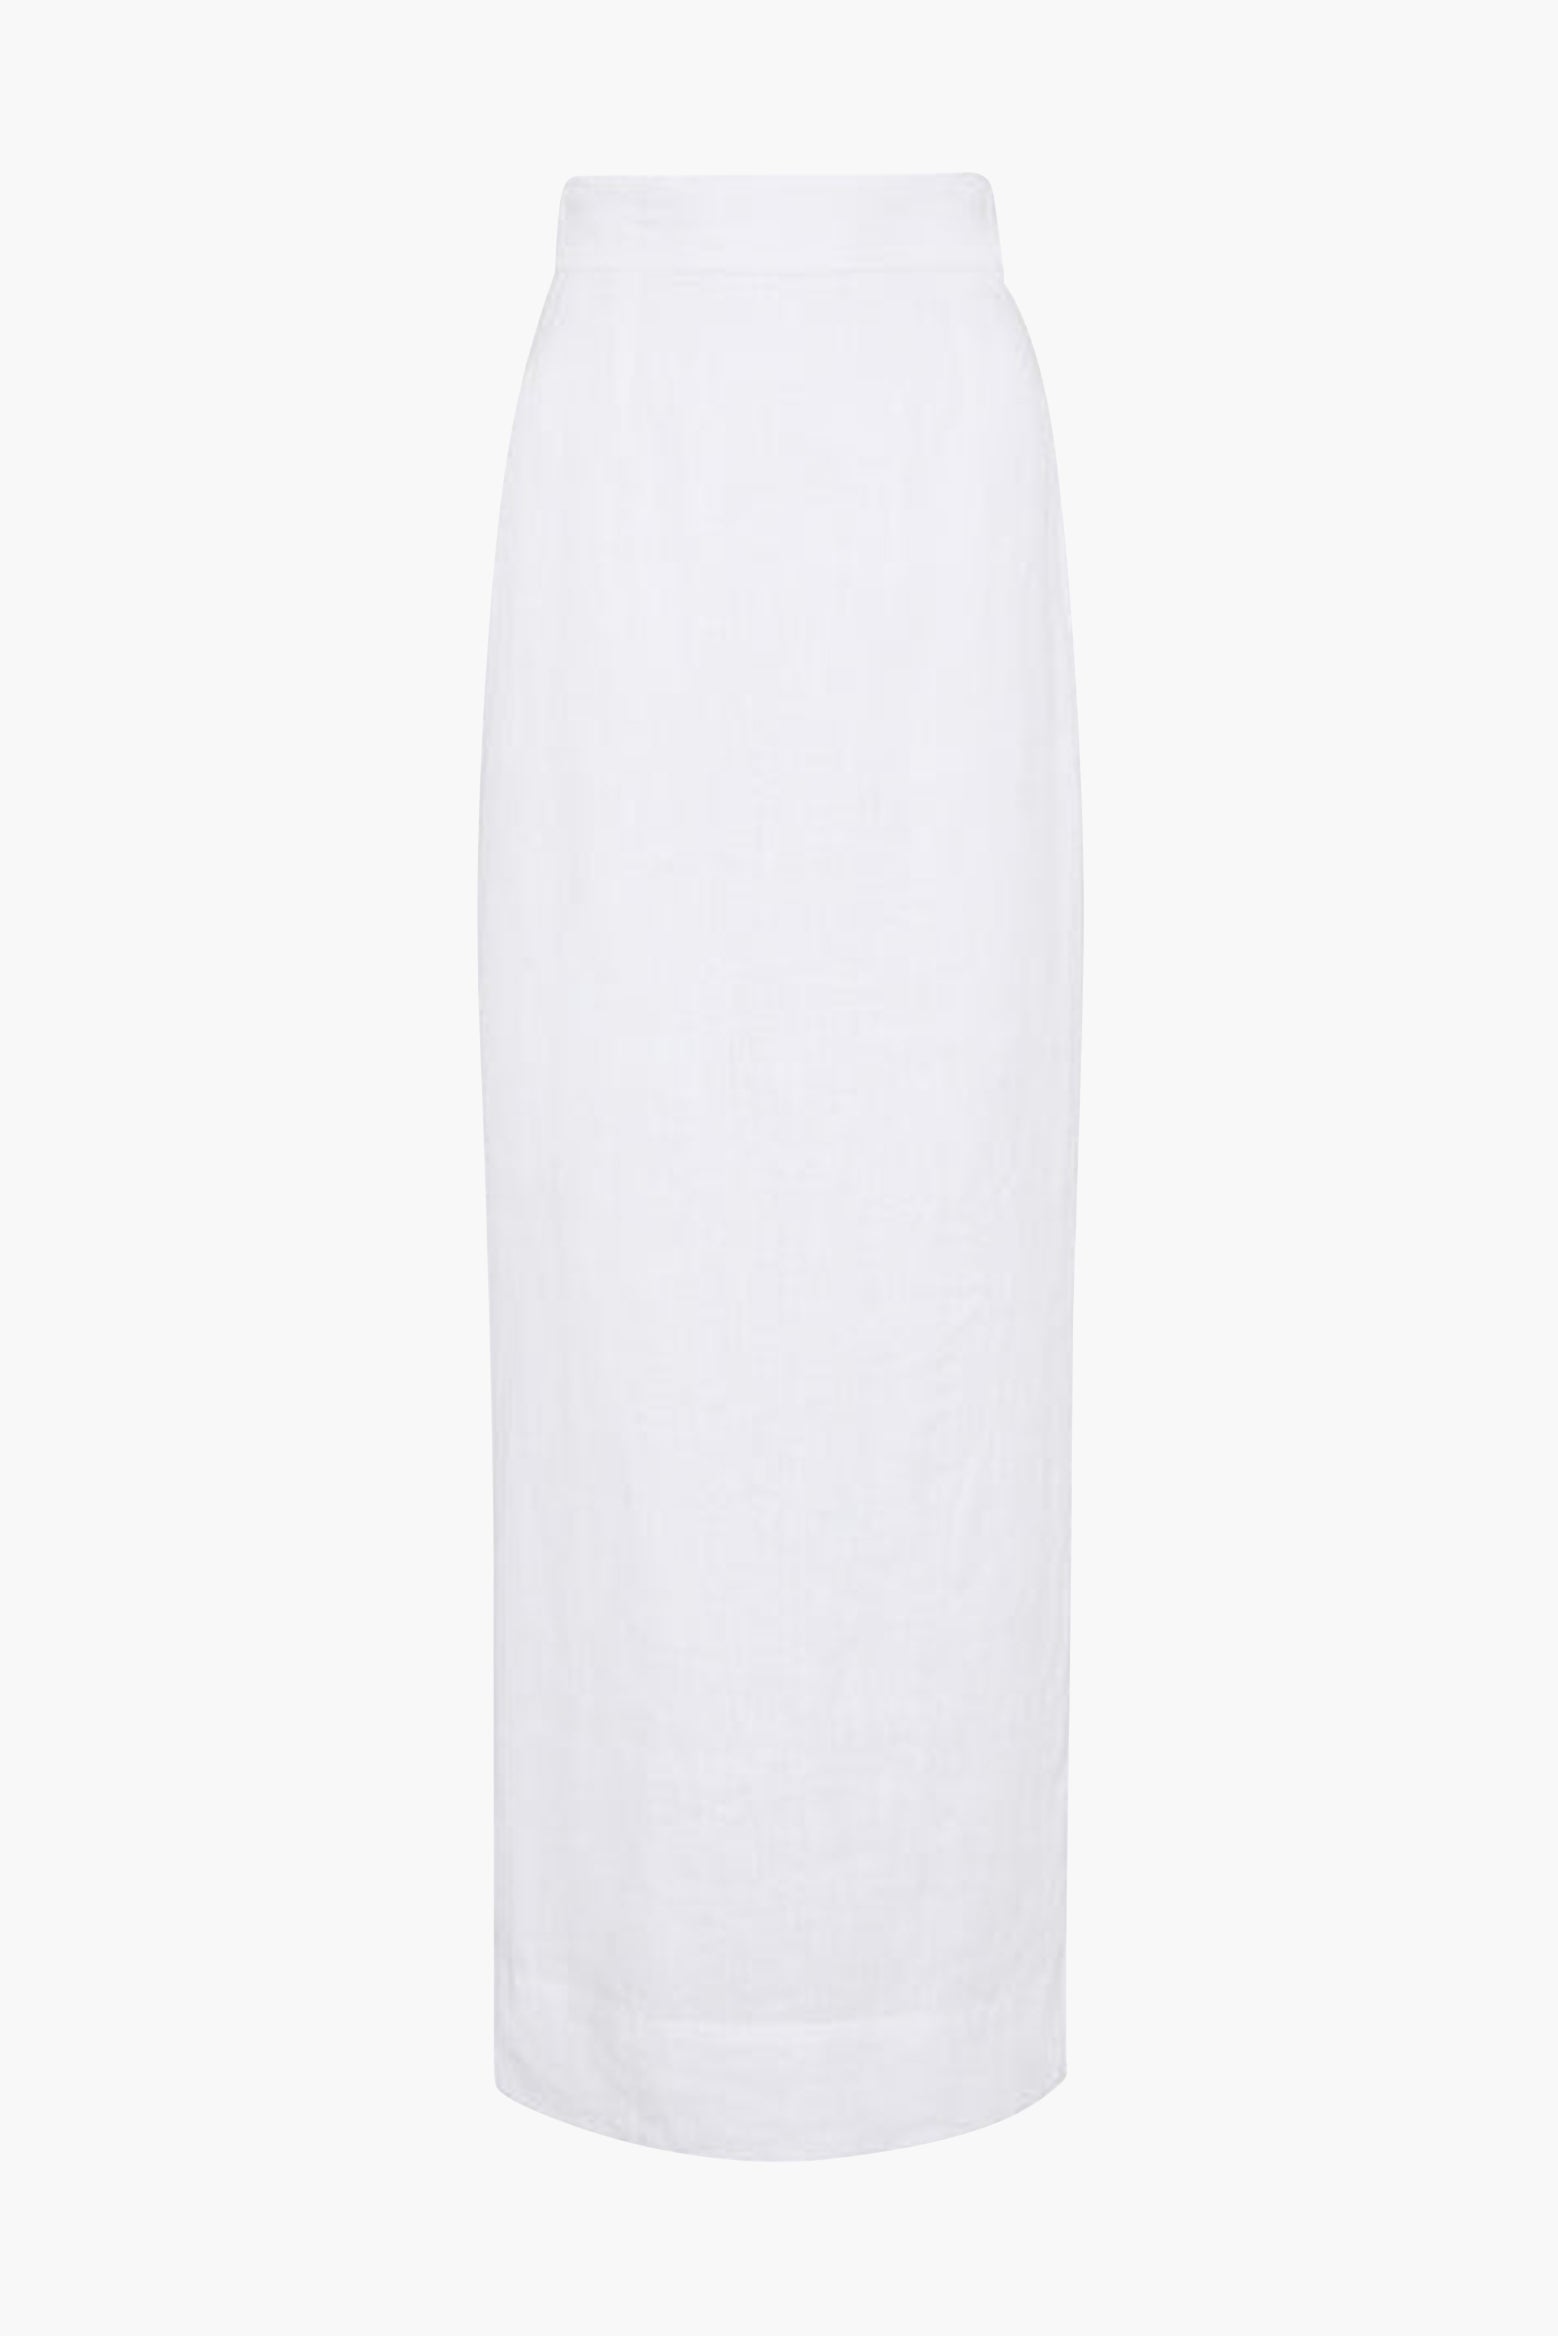 Posse Emma Pencil Skirt in Ivory available at TNT The New Trend Australia